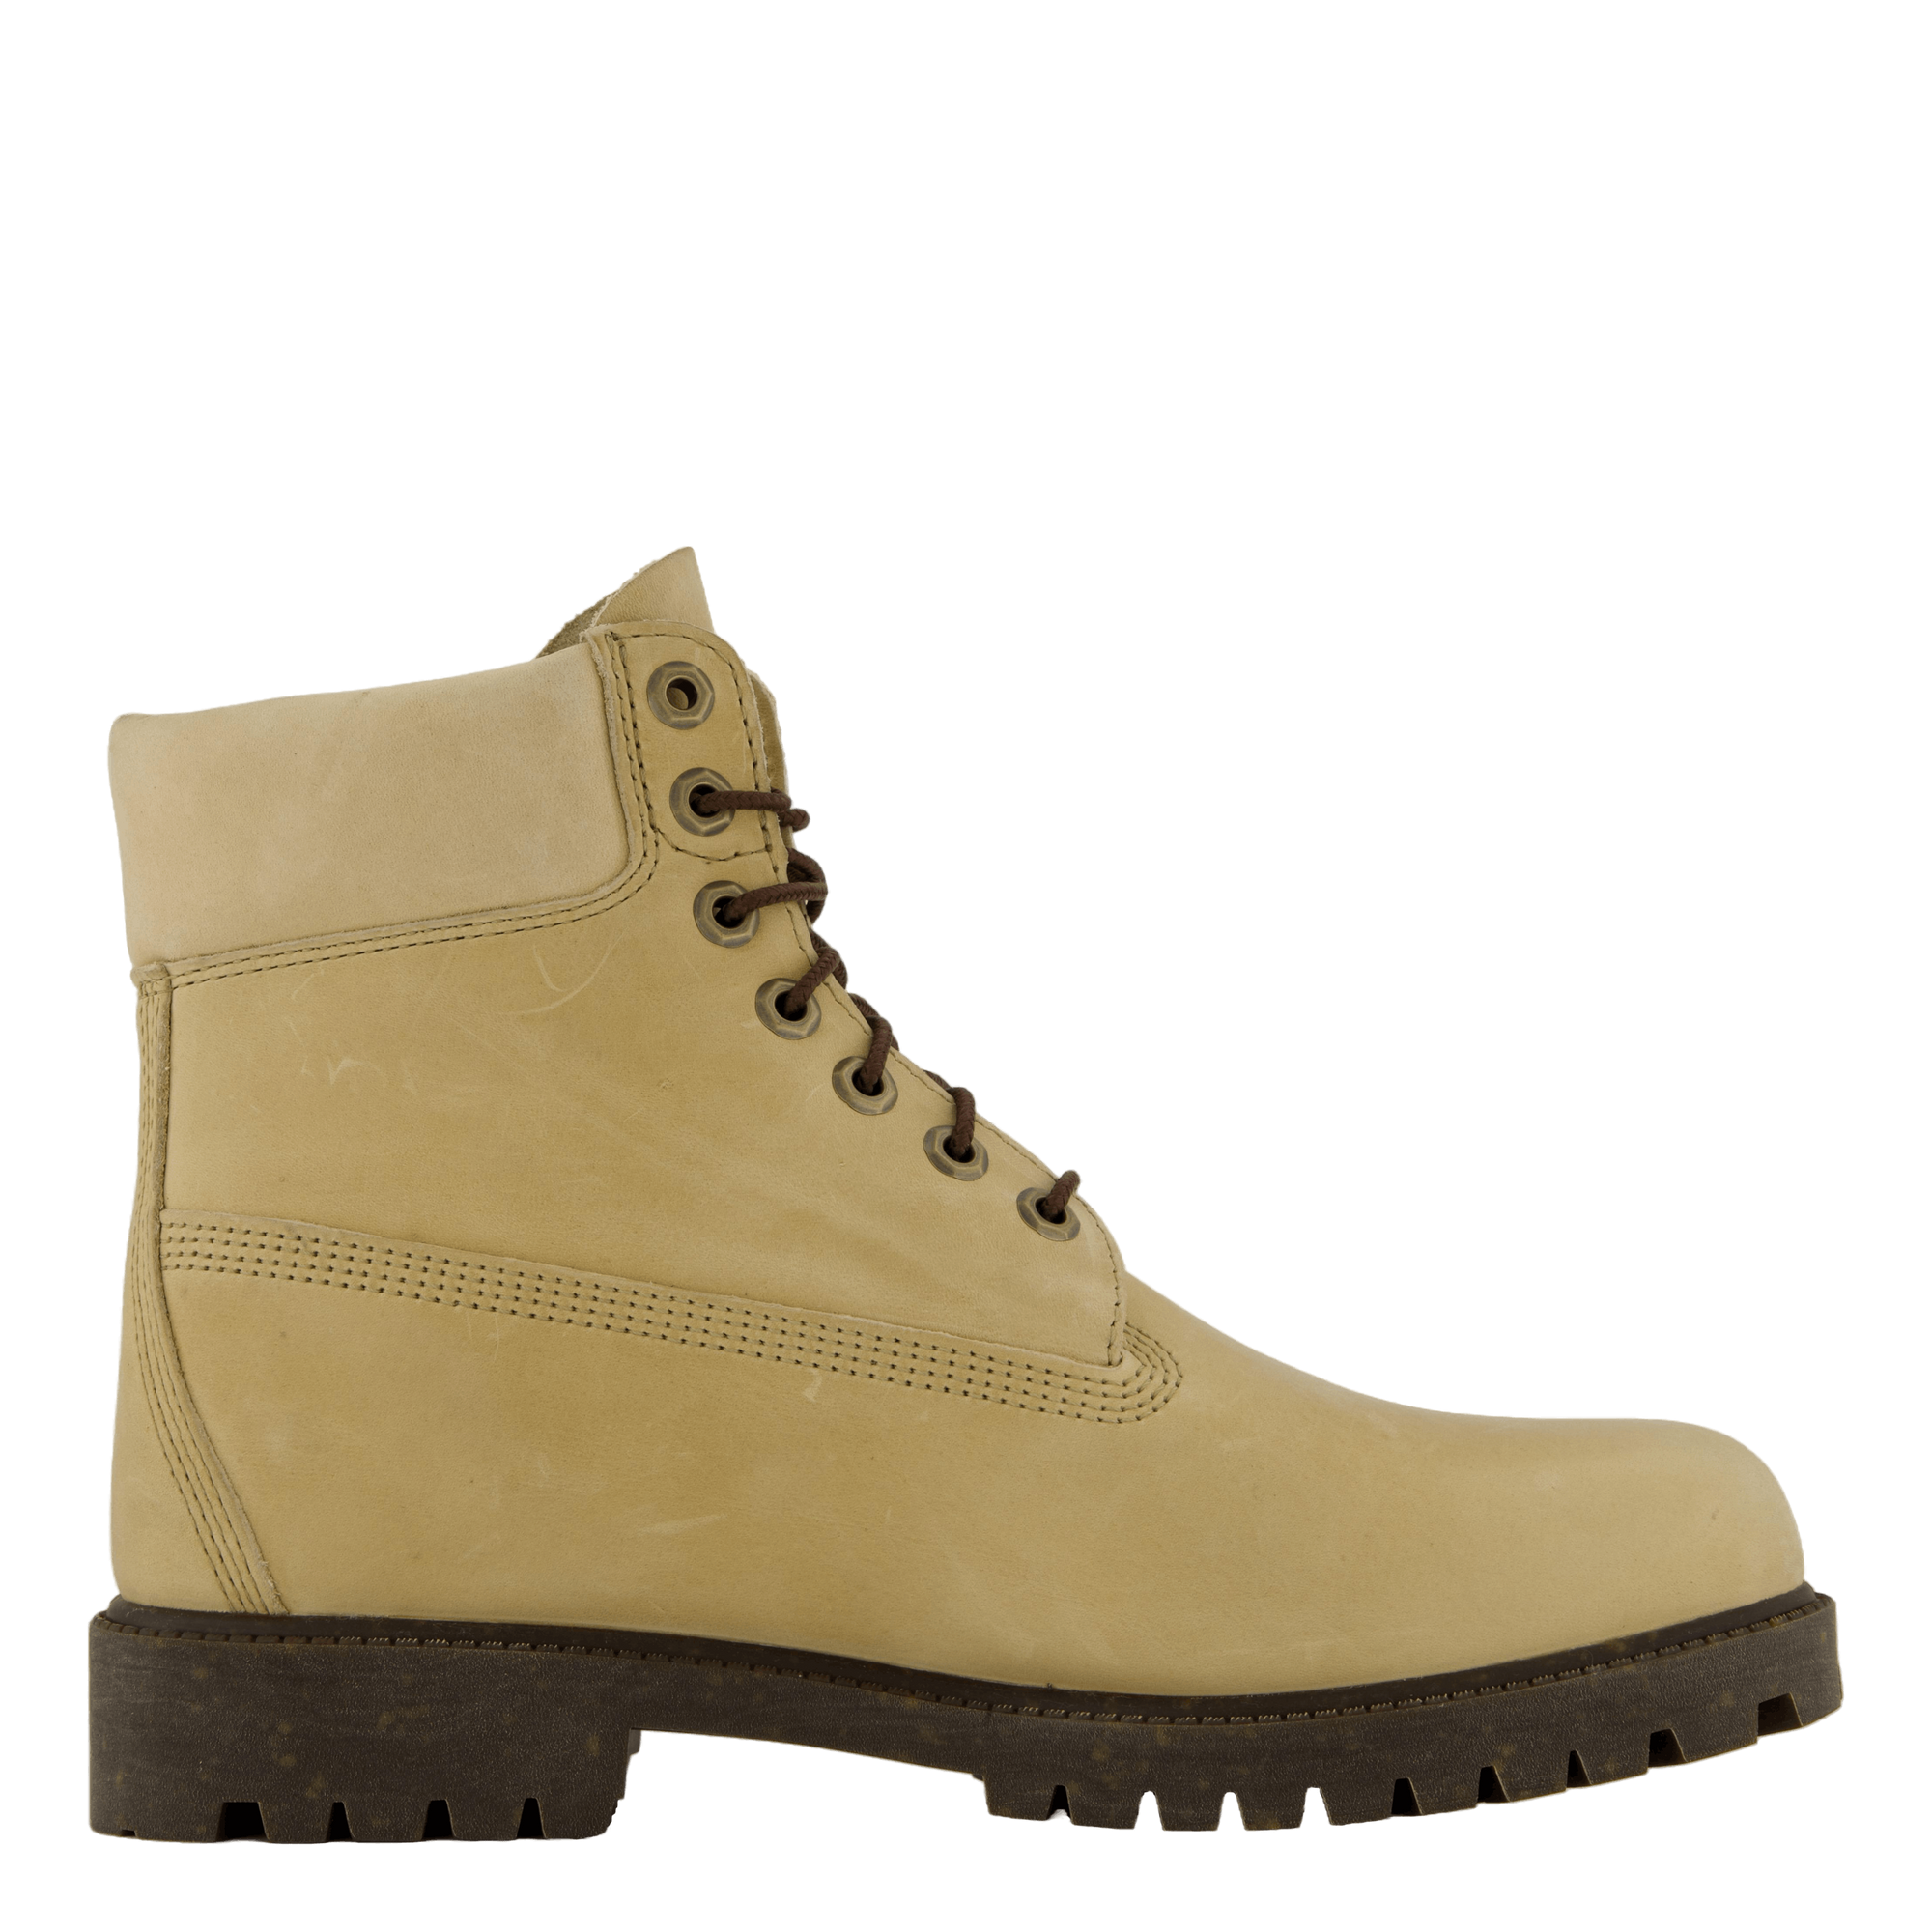 Timberland Heritage 6 Inch Lac Light Beige Full Grain